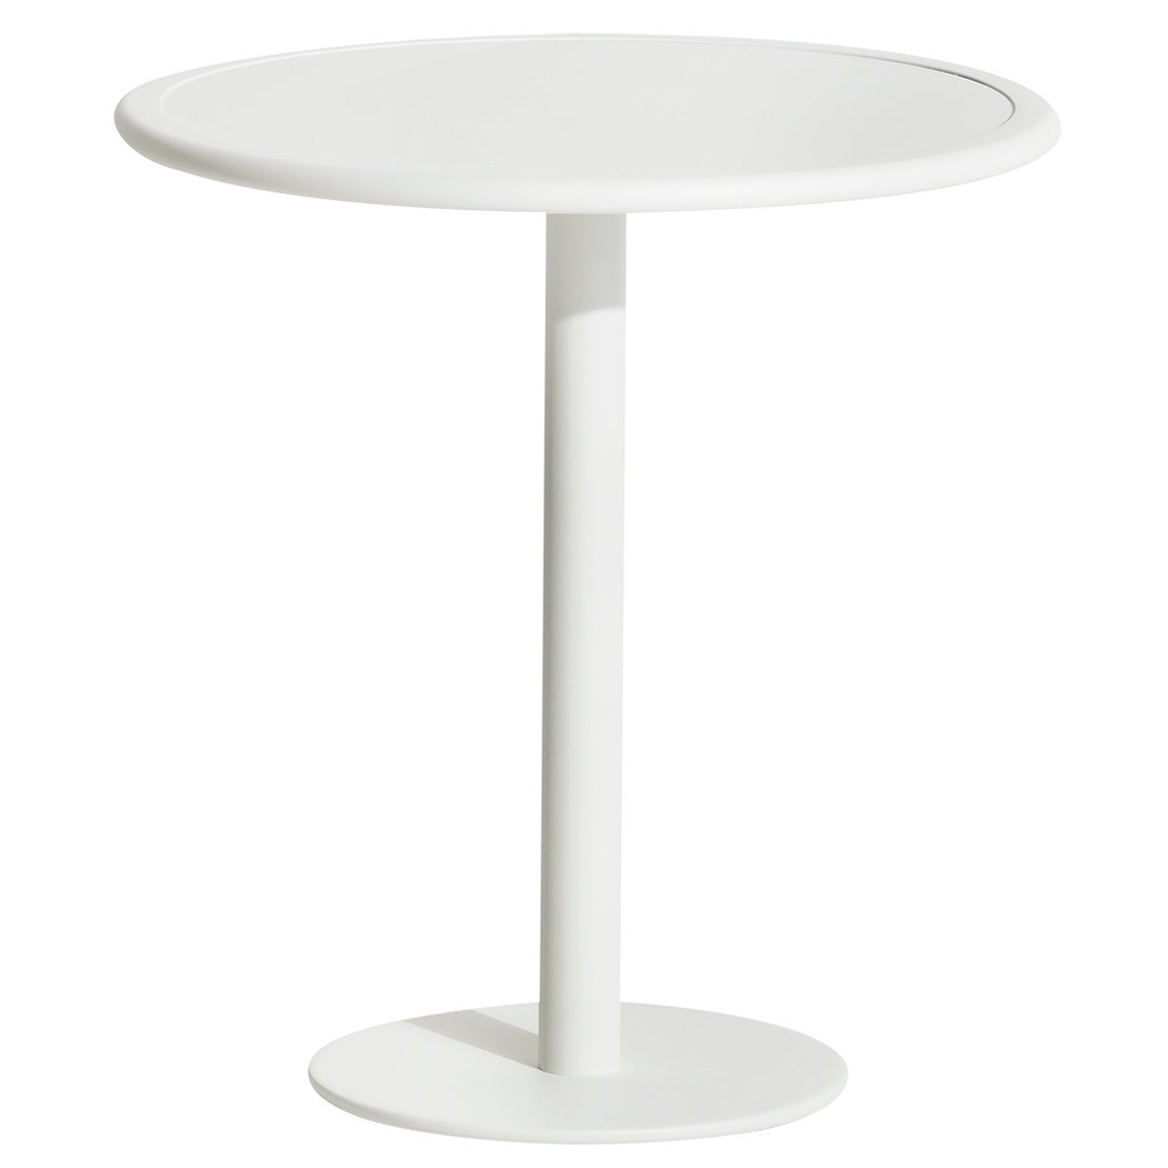 Petite Friture Week-End Bistro Round Dining Table in White Aluminium, 2017 For Sale